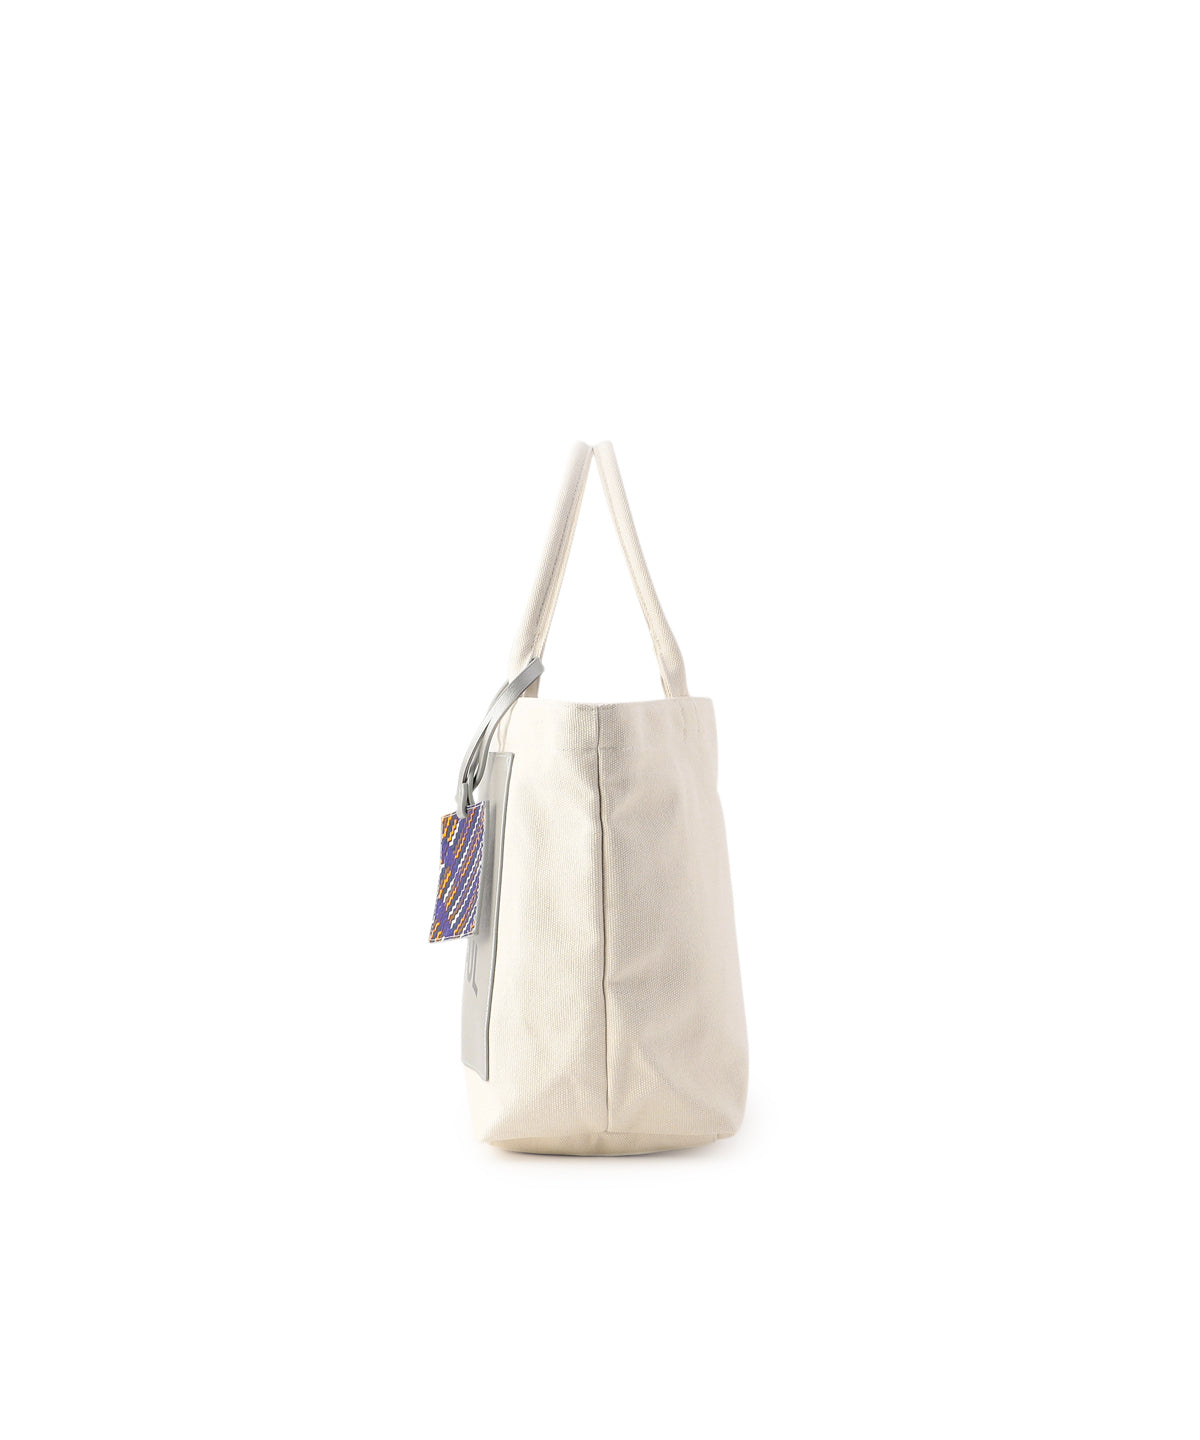 Recycled Canvas Tote (Medium) SILVER